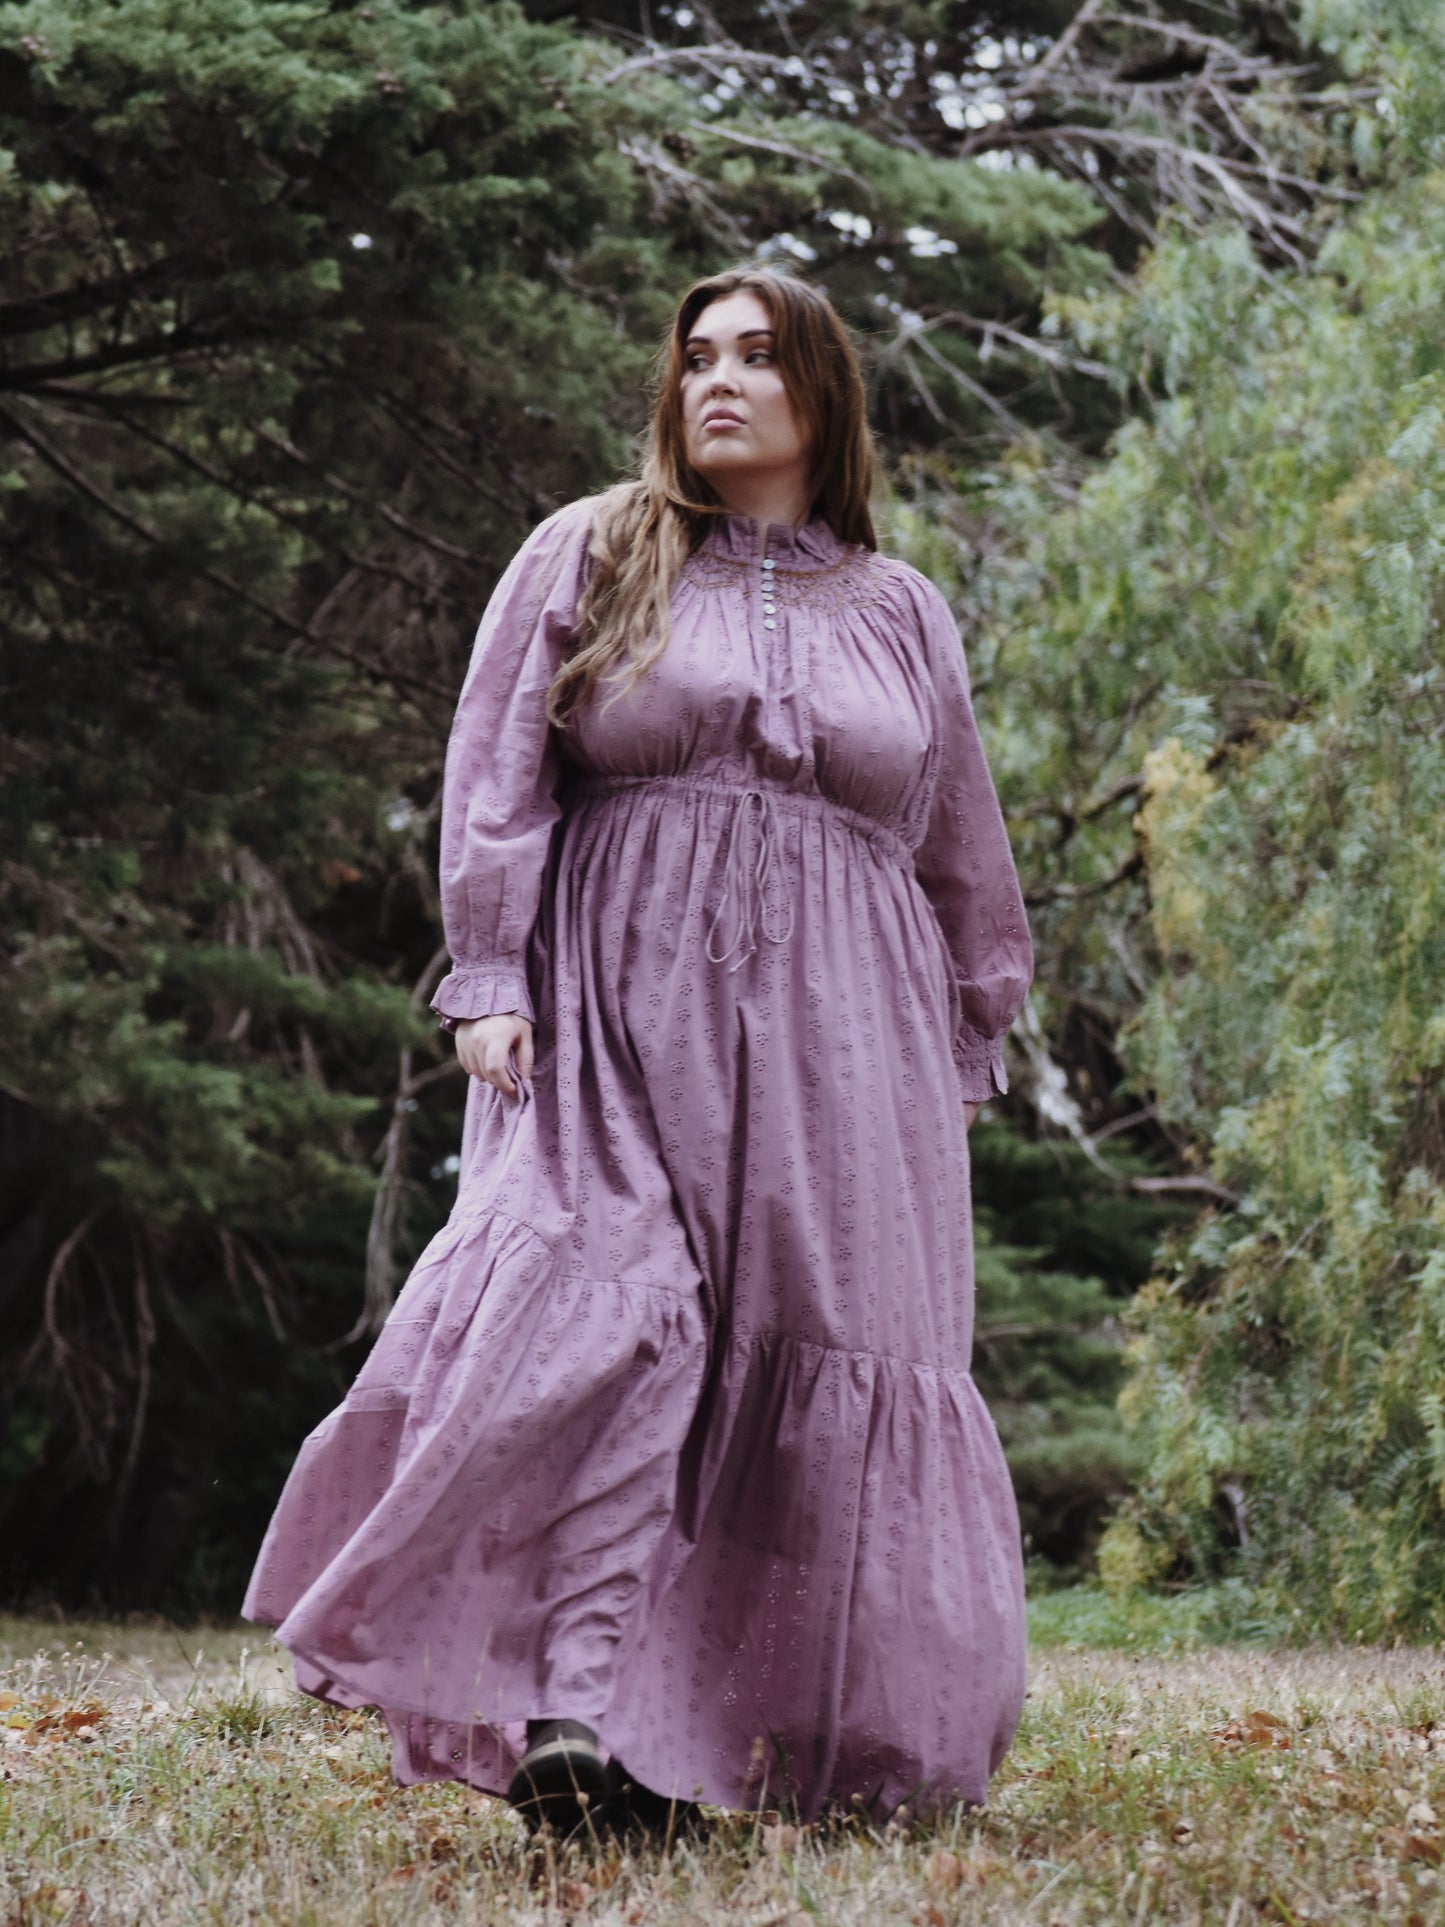 100% RECYCLED COTTON - PRAIRIE MAXI DRESS DUSTY LAVENDER LACE HAND SMOCKED